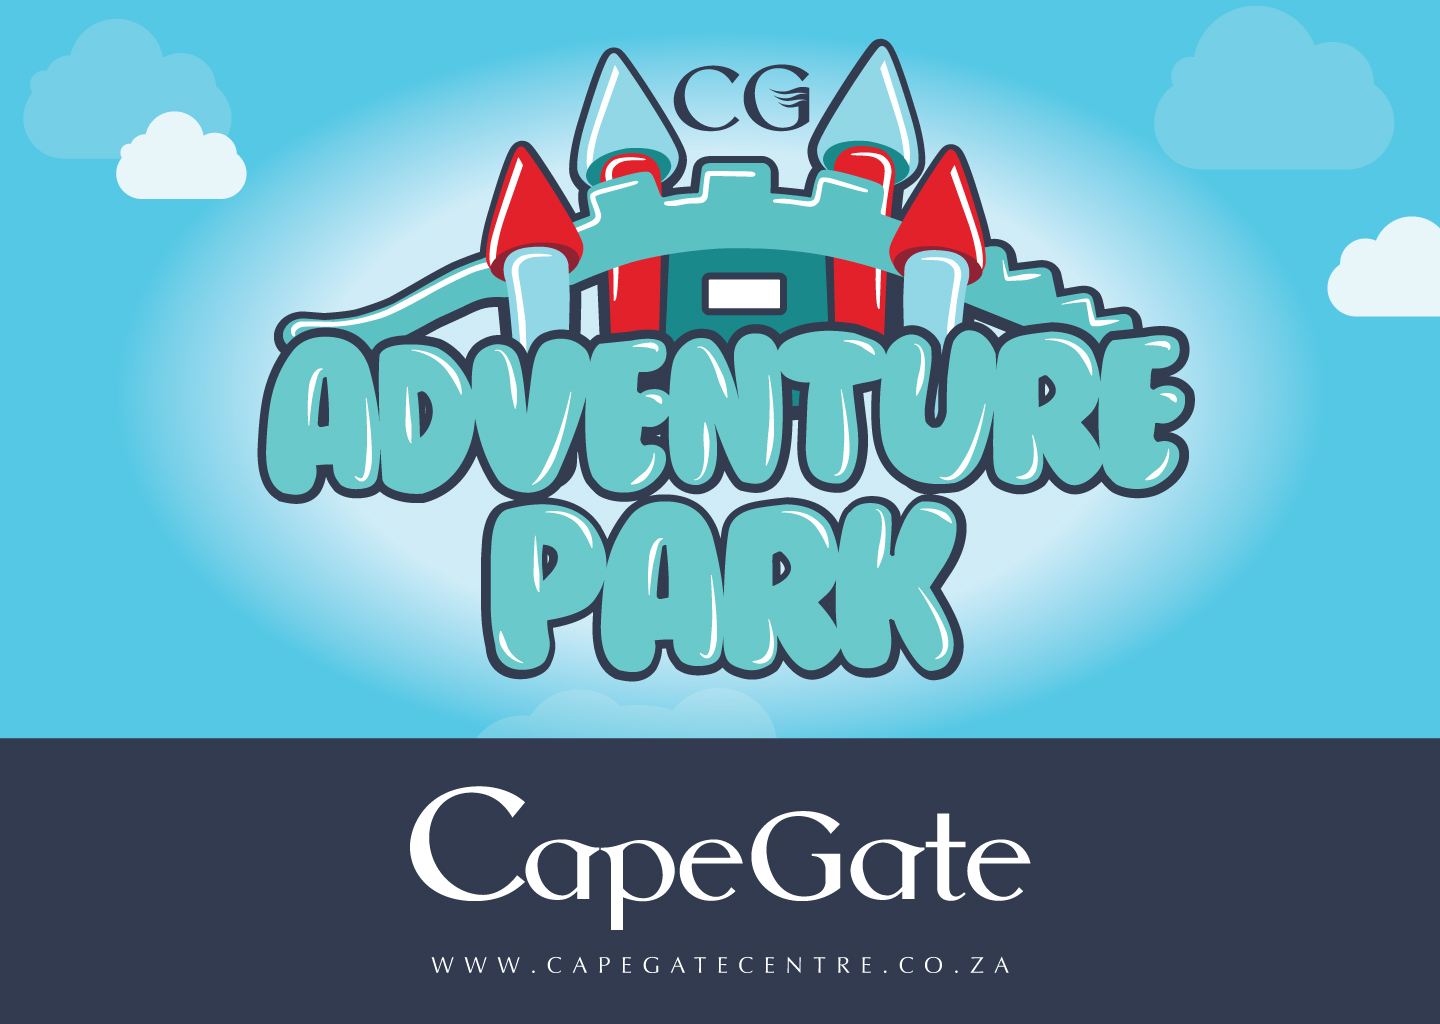 WIN 4 x Tickets for the Capegate Adventure Park this Winter